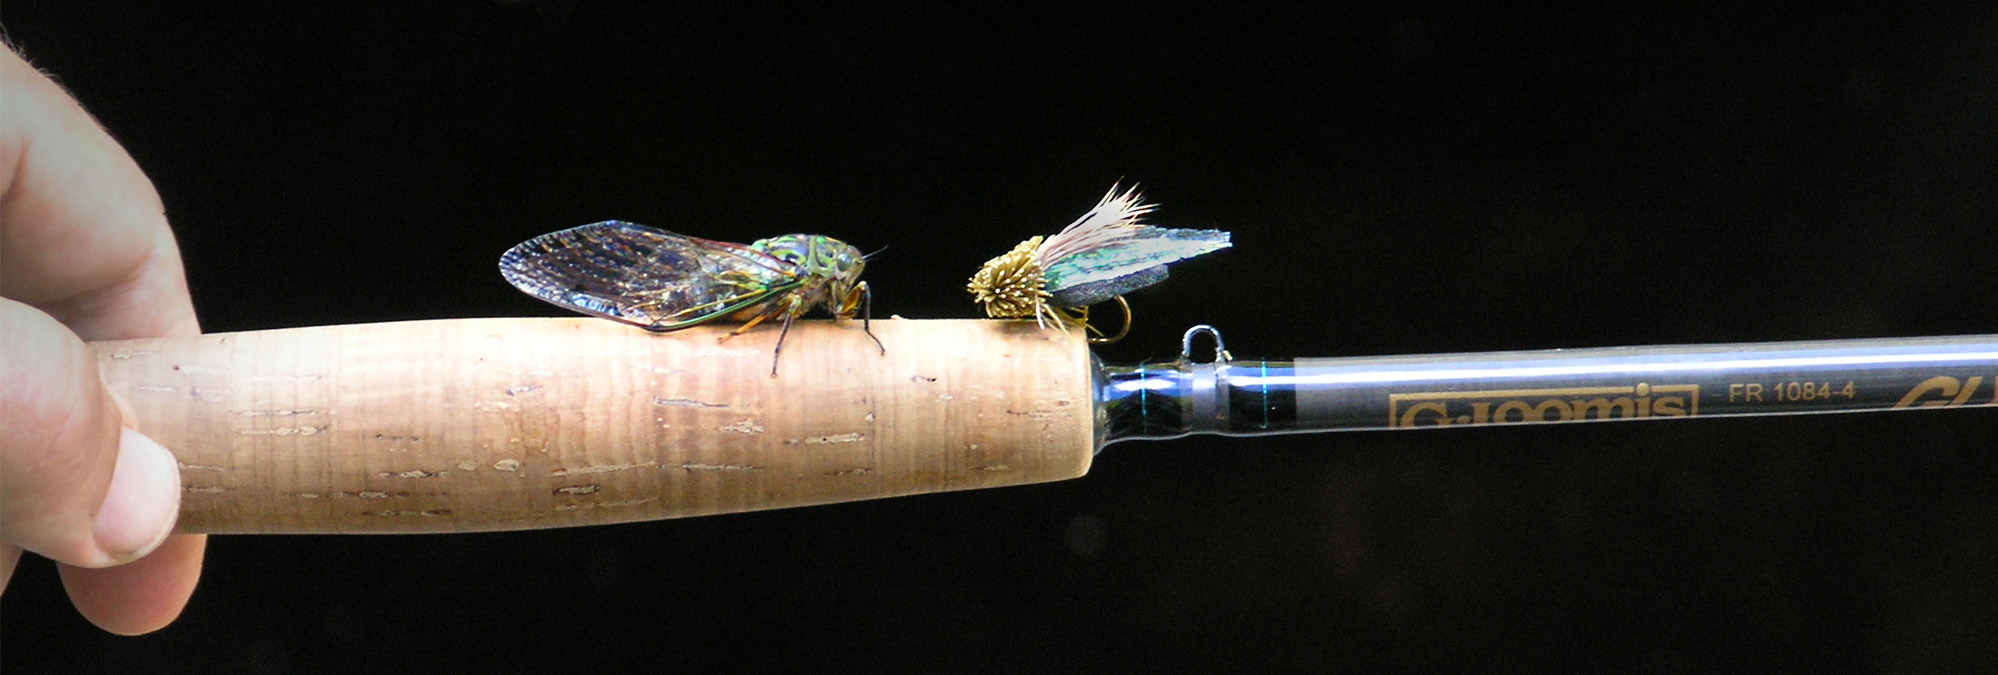 SILVERWATER FLY FISHING & DESIGN : SILICONE WING CICADA FLY PATTERN & TYING  STEPS